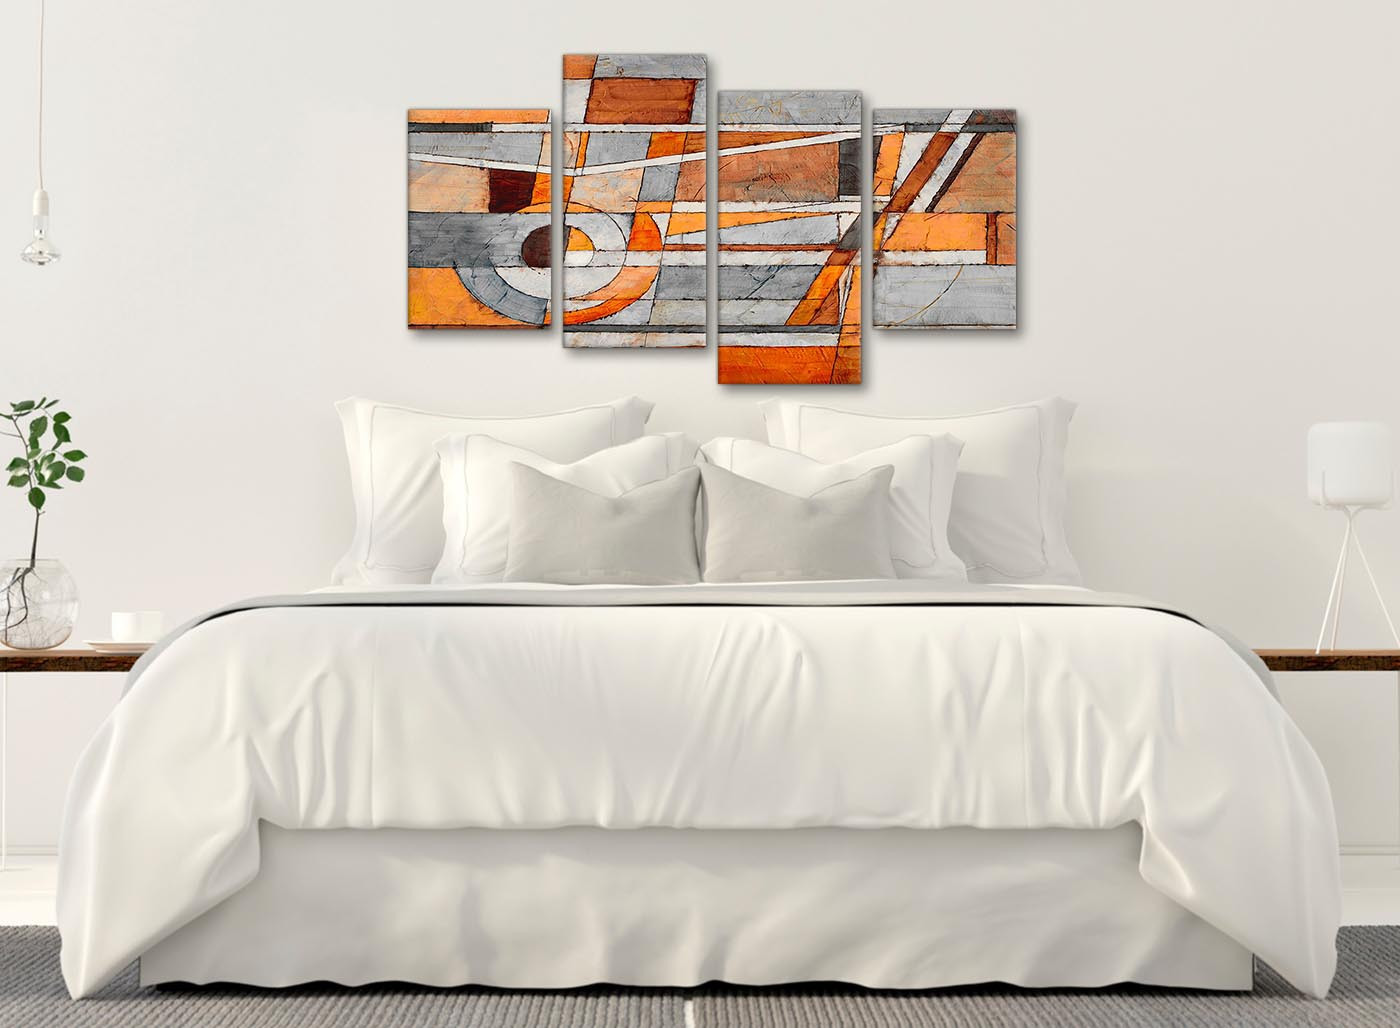 Large Bedroom Wall Art
 Burnt Orange Grey Painting Abstract Living Room